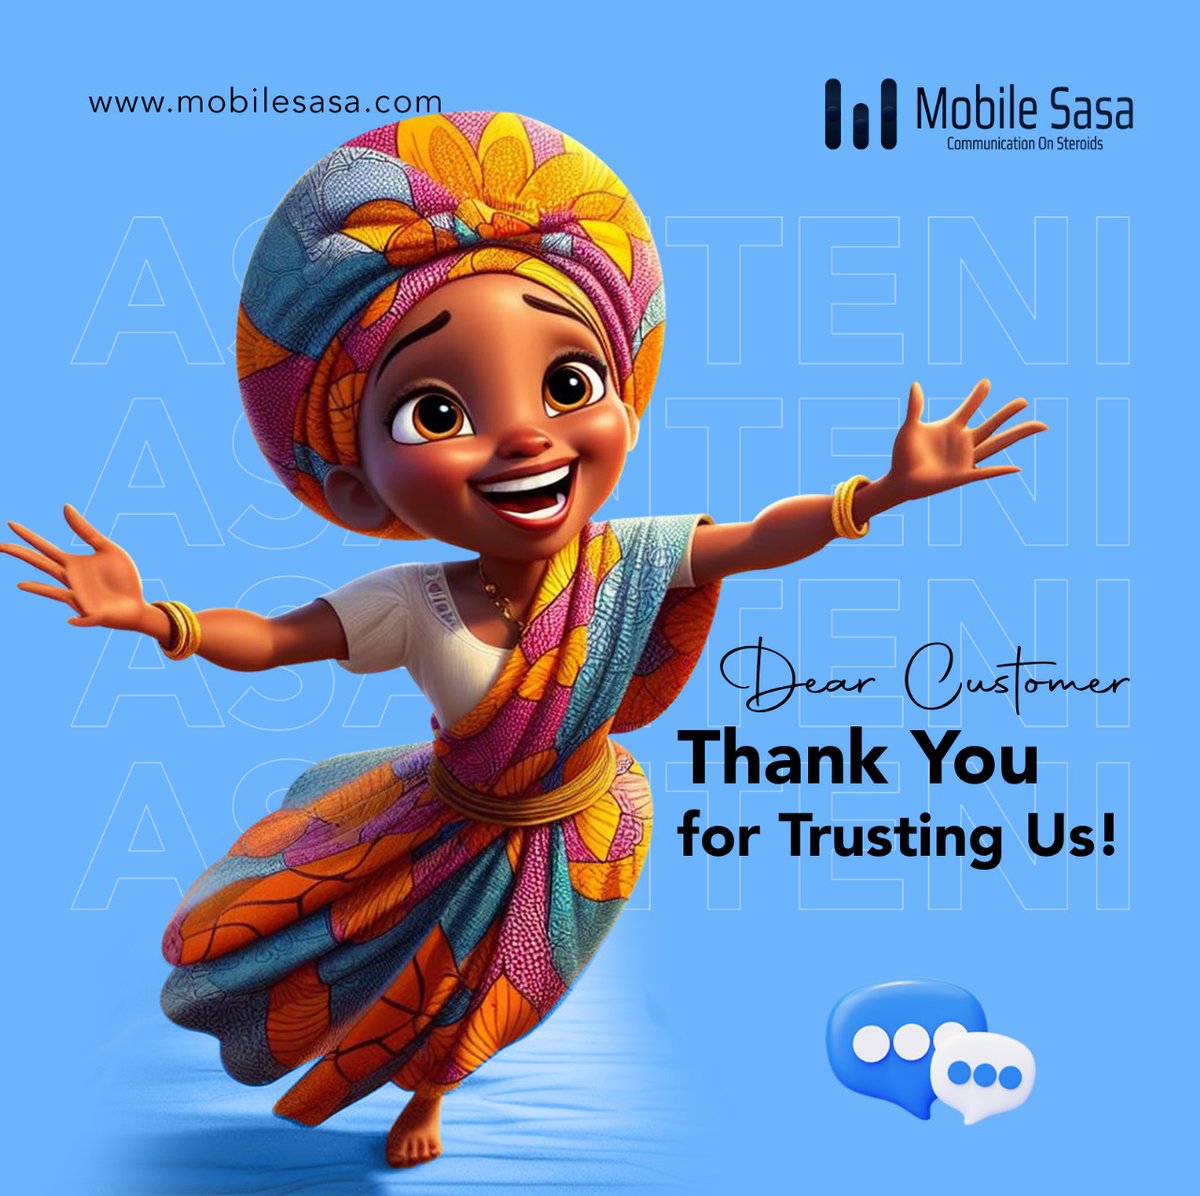 A heartfelt thank you to all our clients for trusting us to deliver the best services for your companies. We are honored to be part of your success stories. Here's to many more achievements together! 🙏💼  #DTB #Muthaigagolfclub #Shofcosacco
mobilesasa.com/about-us/